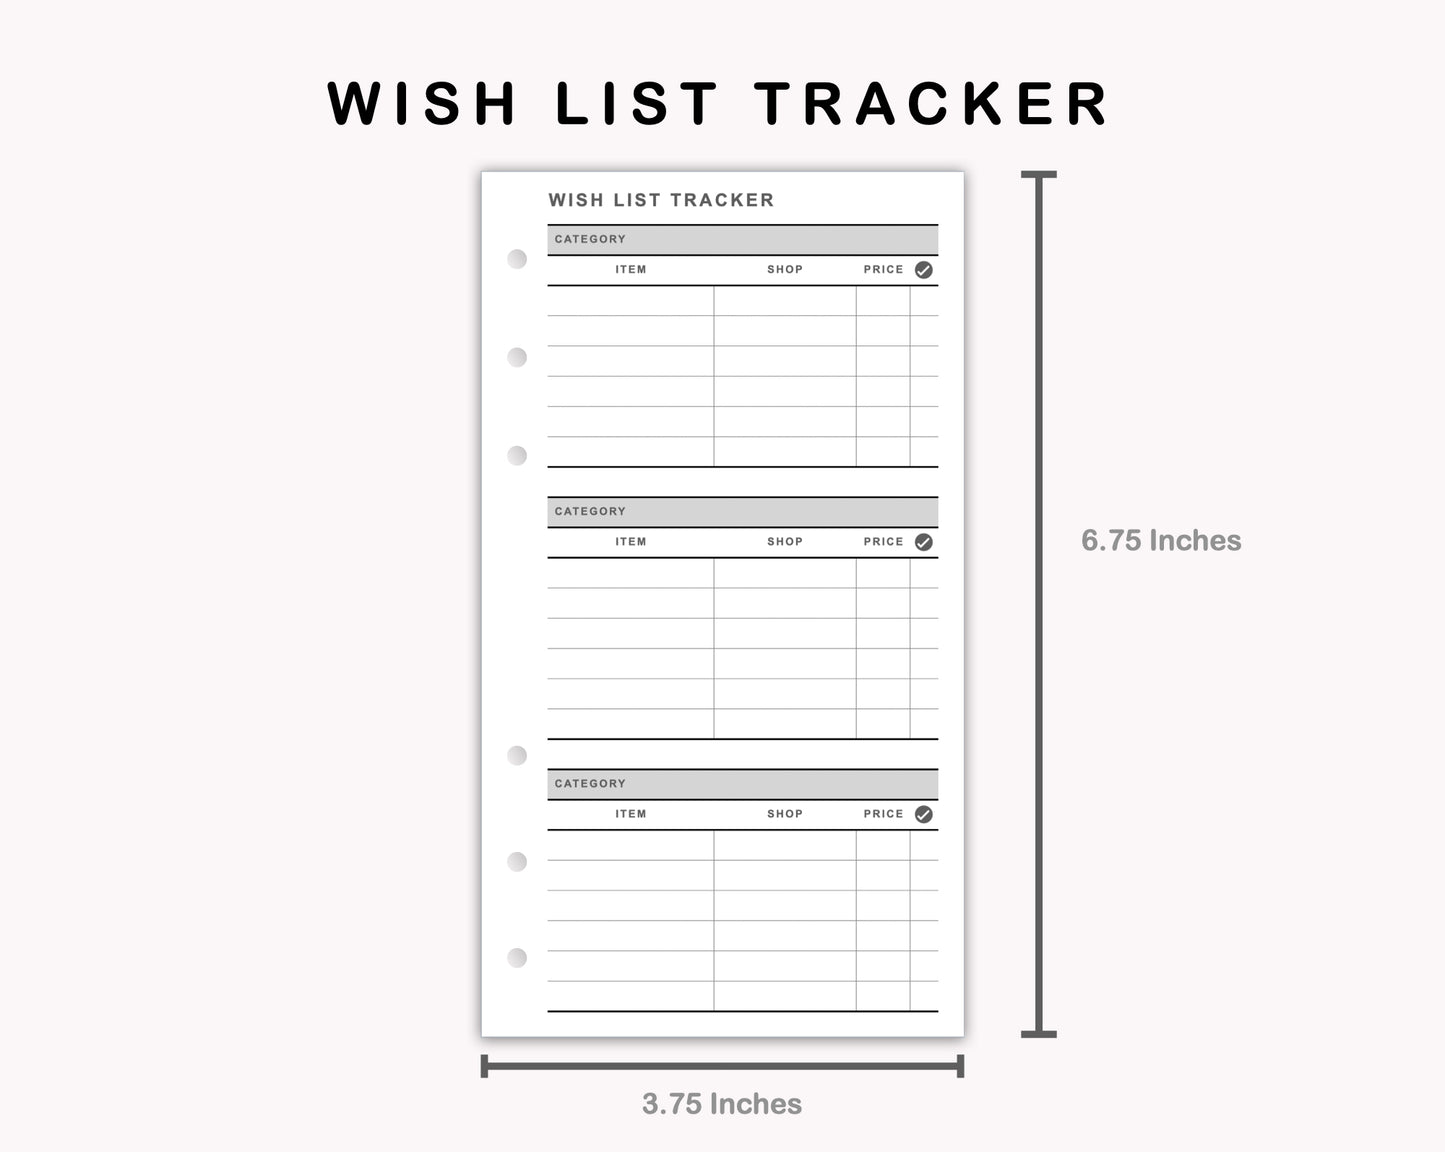 Personal Inserts - Wish List Tracker by Category